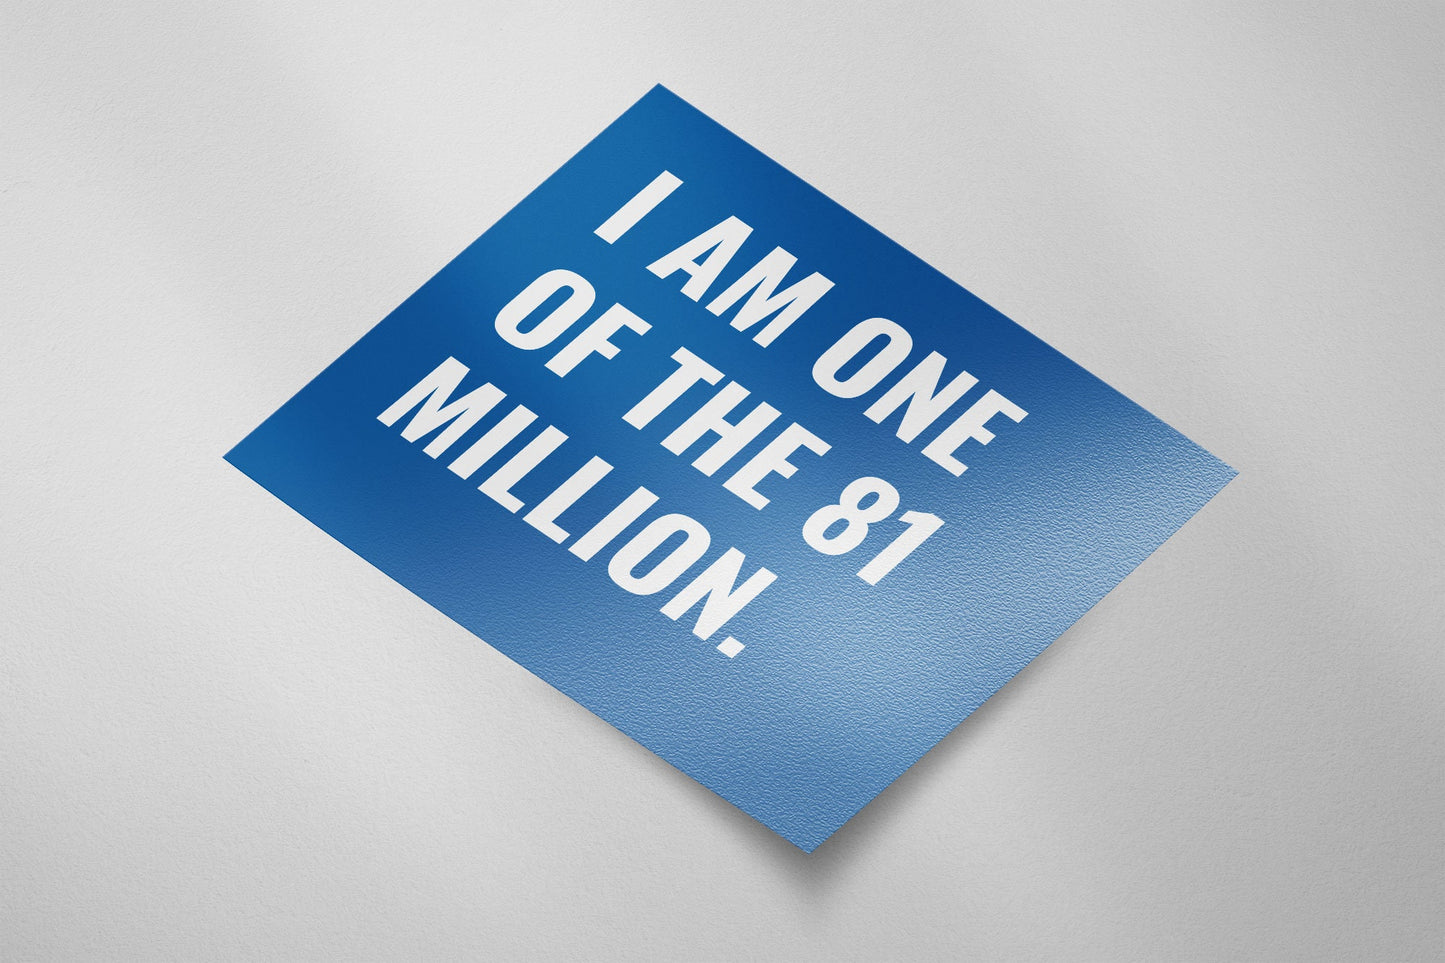 I Am One of the 81 Million - Sticker